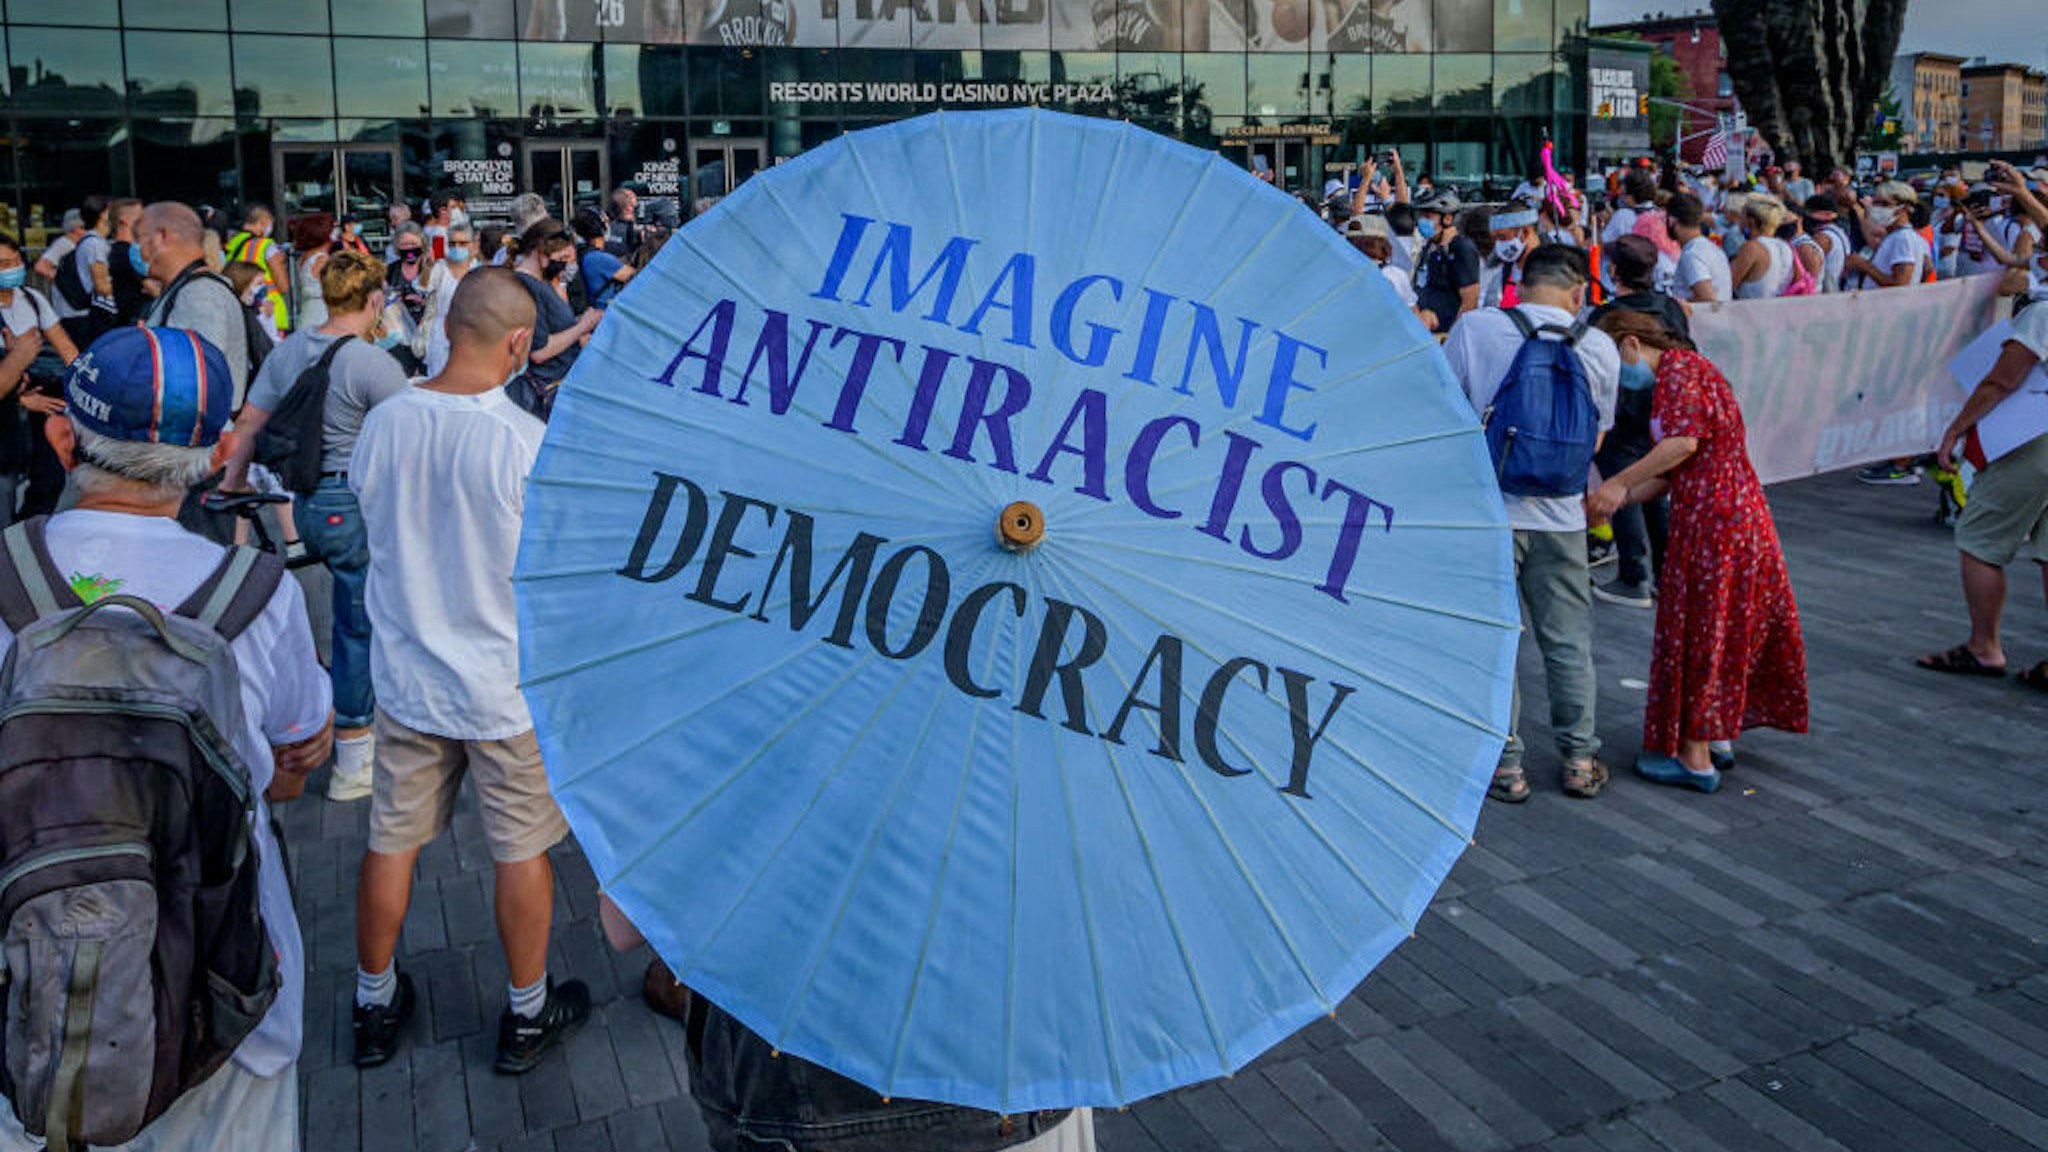 A participant carrying an umbrealla with the words Imagine Antiracist Democracy. On the eve of the Republican National Convention, a coalition of Americans reeling from the COVID-related deaths of loved ones, unemployment, and all this crisis has wrought gathered at Barclays Center to turn their sadness and frustration into protest by organizing the March for the Dead, Fight for the Living, a candlelit procession across the Brooklyn Bridge to the Trump Building at 40 Wall Street in Manhattan demanding the Trump administration and beyond to take responsible action to save lives and end suffering. (Photo by Erik McGregor/LightRocket via Getty Images)